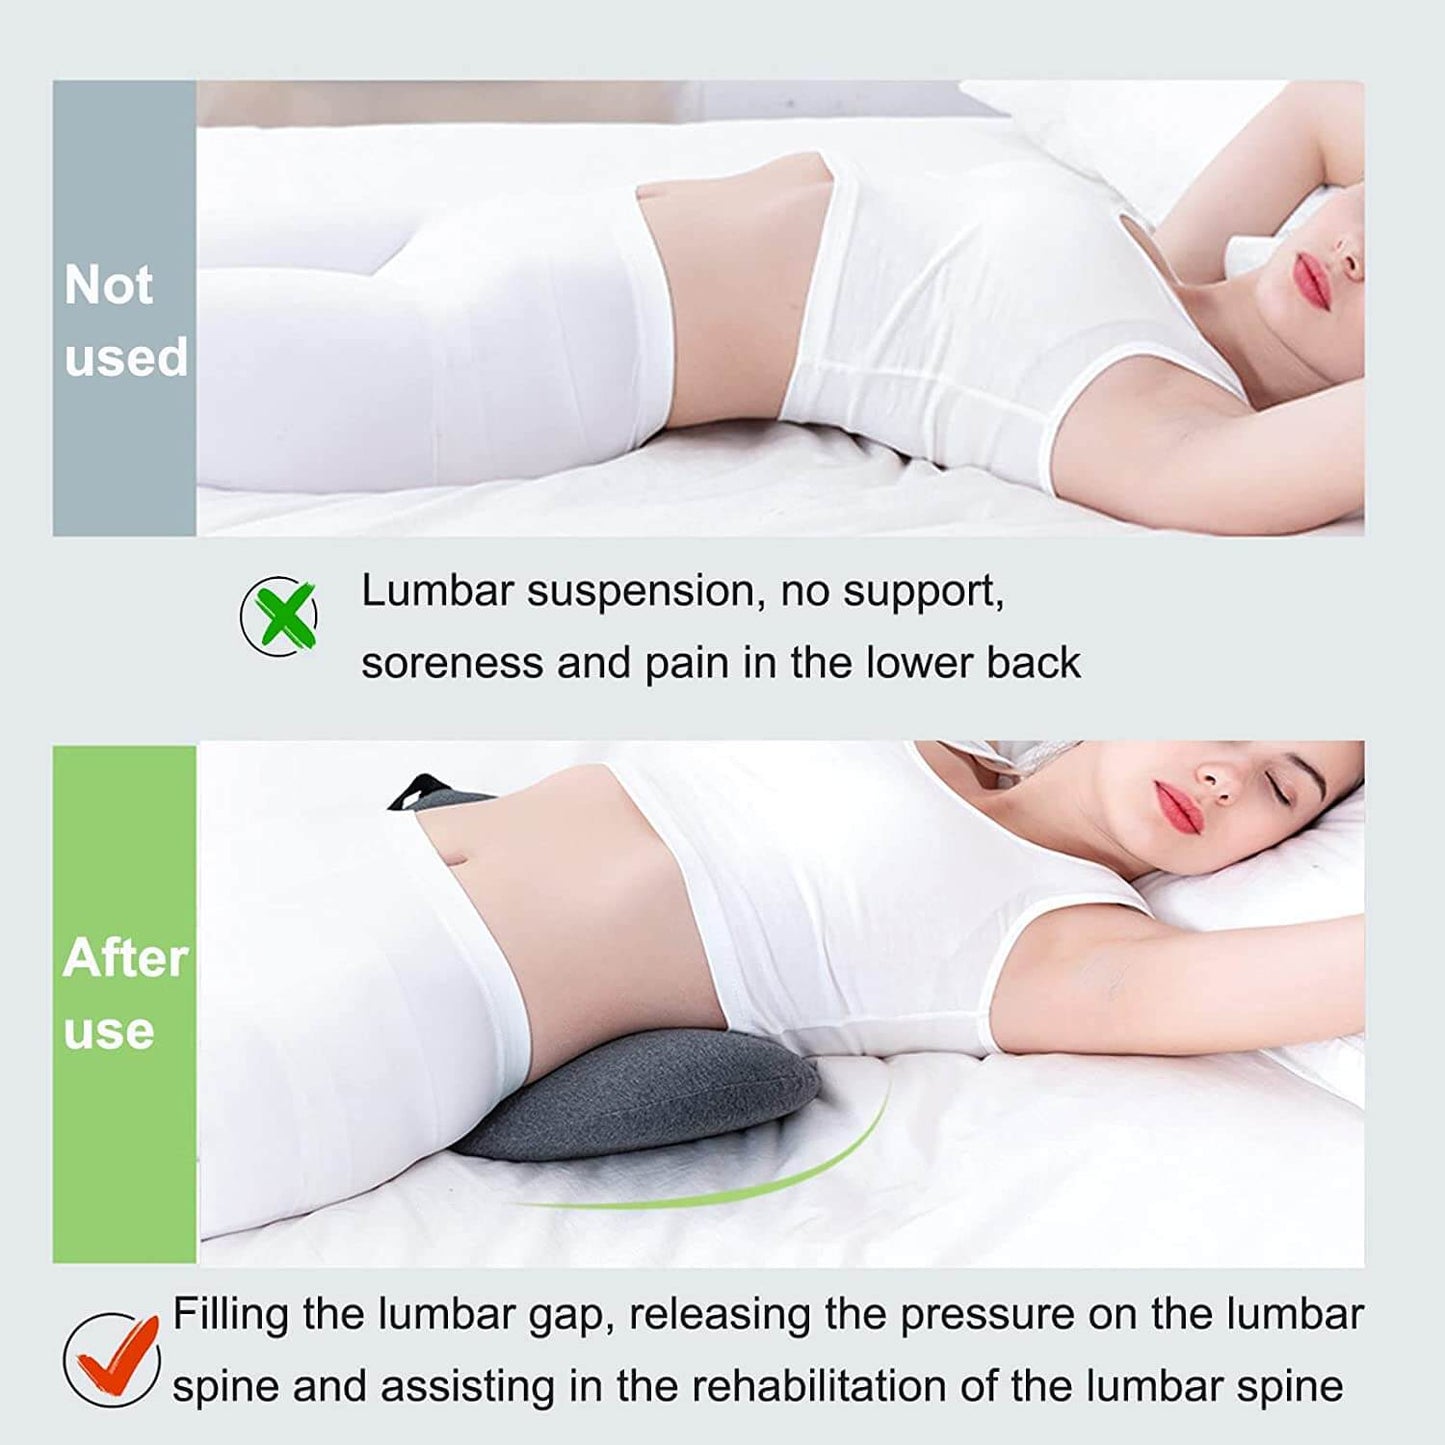 lumbar support pillow's differences beween use and not using